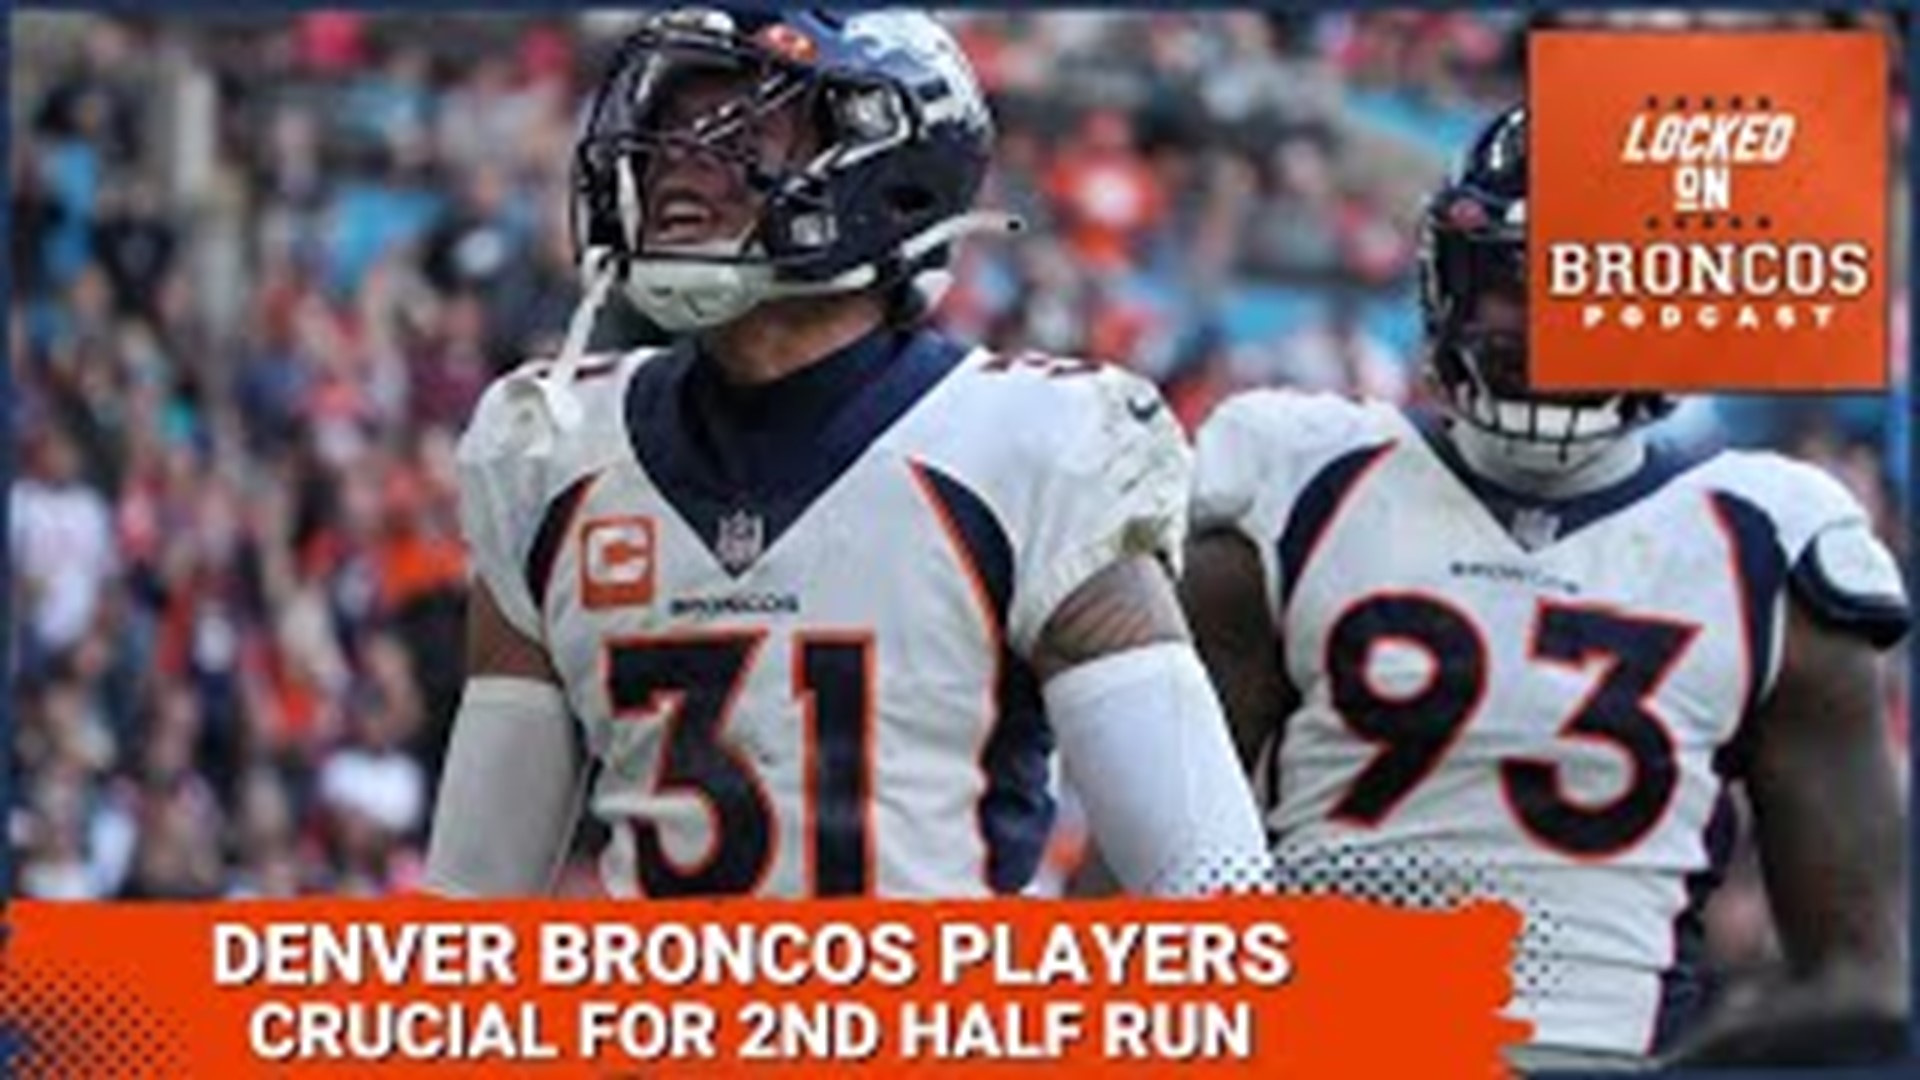 For the Broncos offense, why are Russell Wilson, Courtland Sutton, and Greg Dulcich going to be critical playmakers down the stretch?